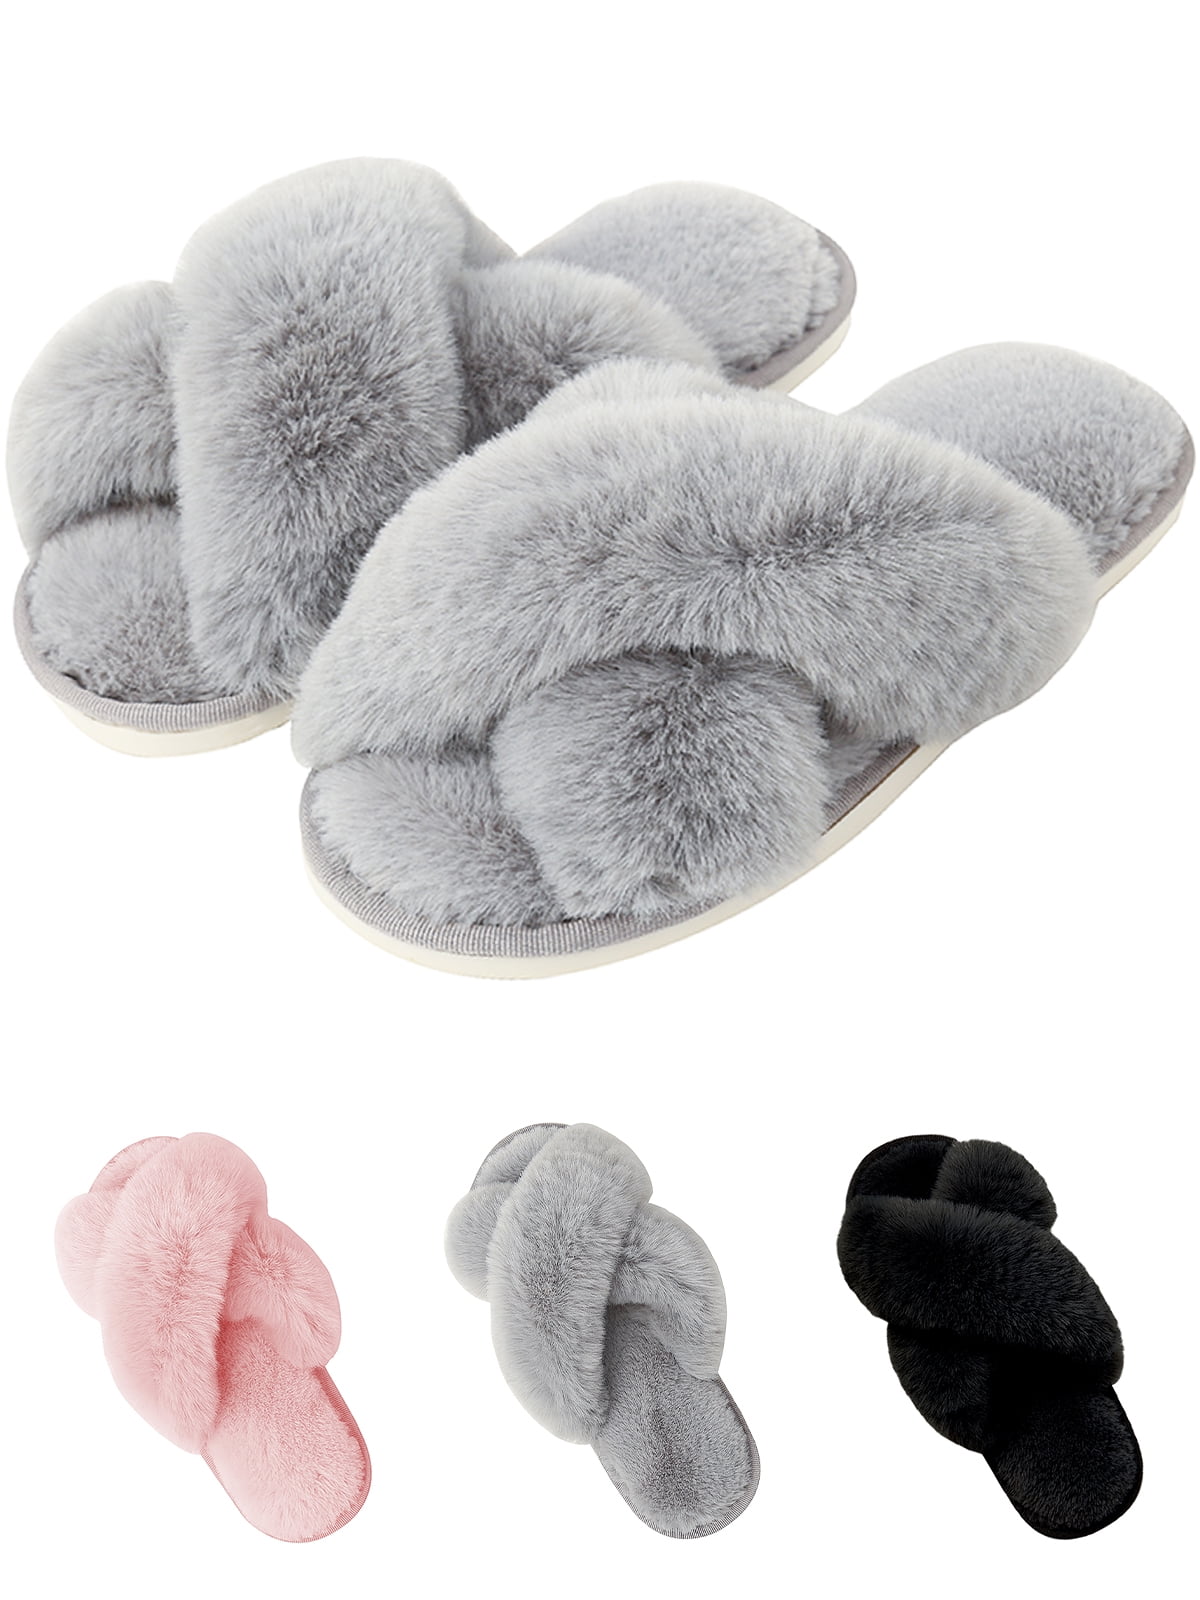 House Slippers Women Anti-Skid Rubber Sole Comfortable Warm Washable ...